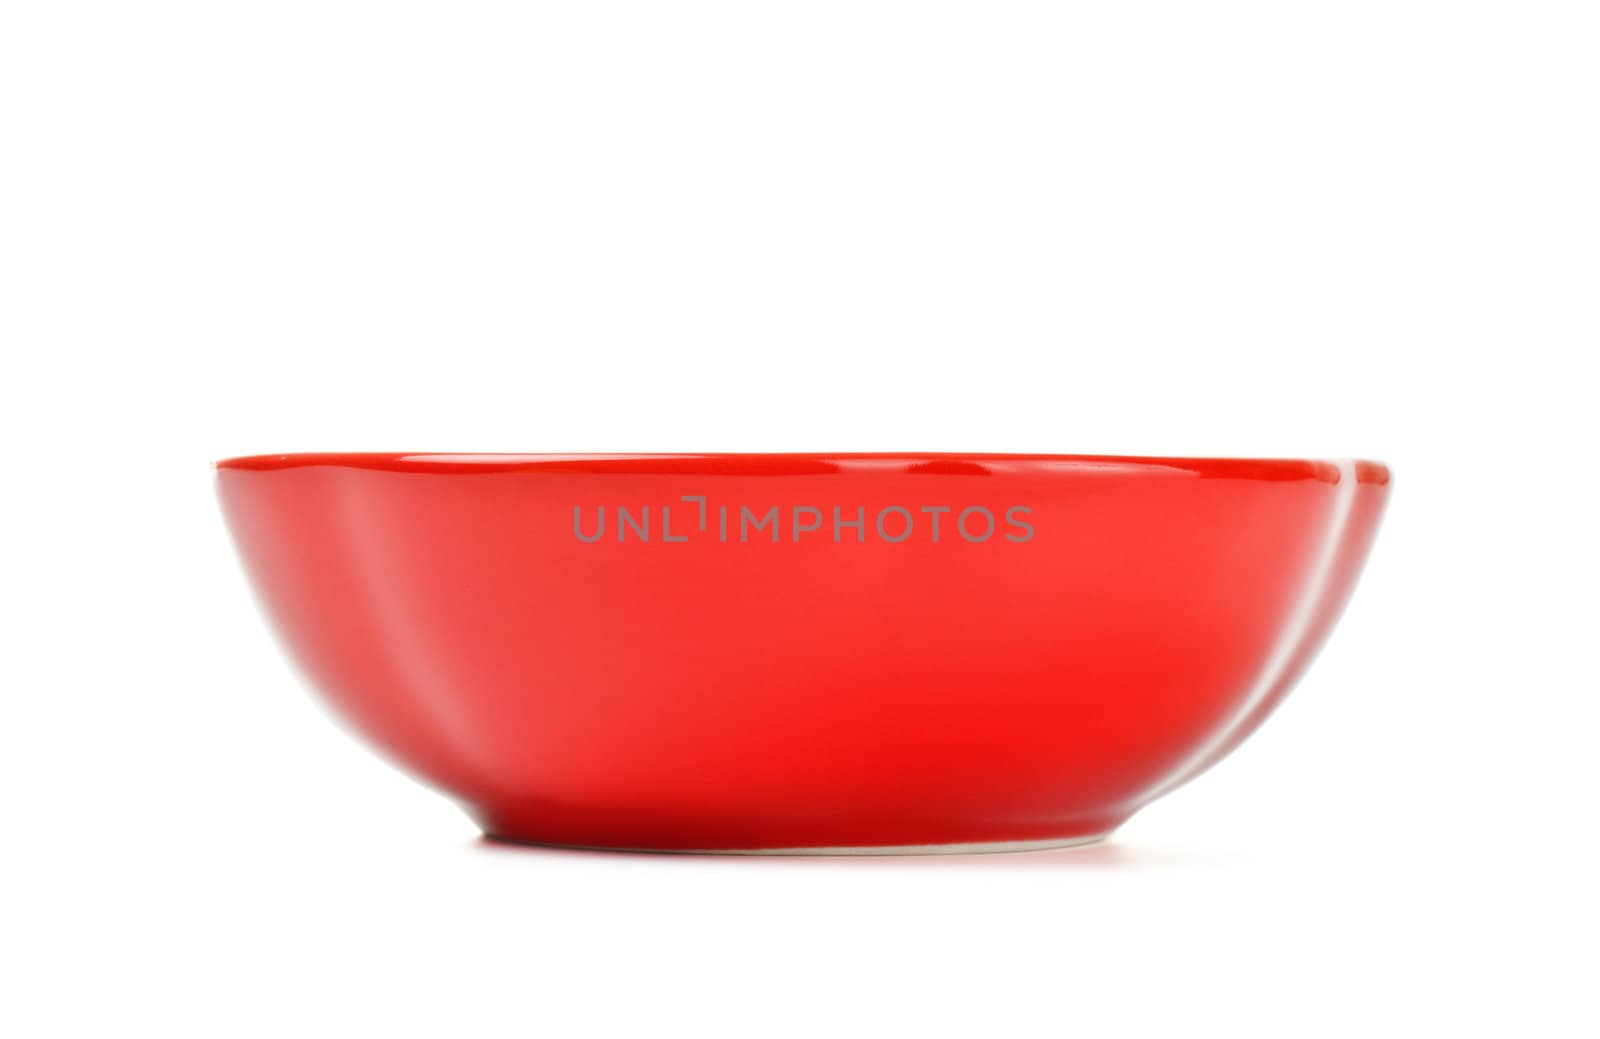 red salad bowl isolated on white background